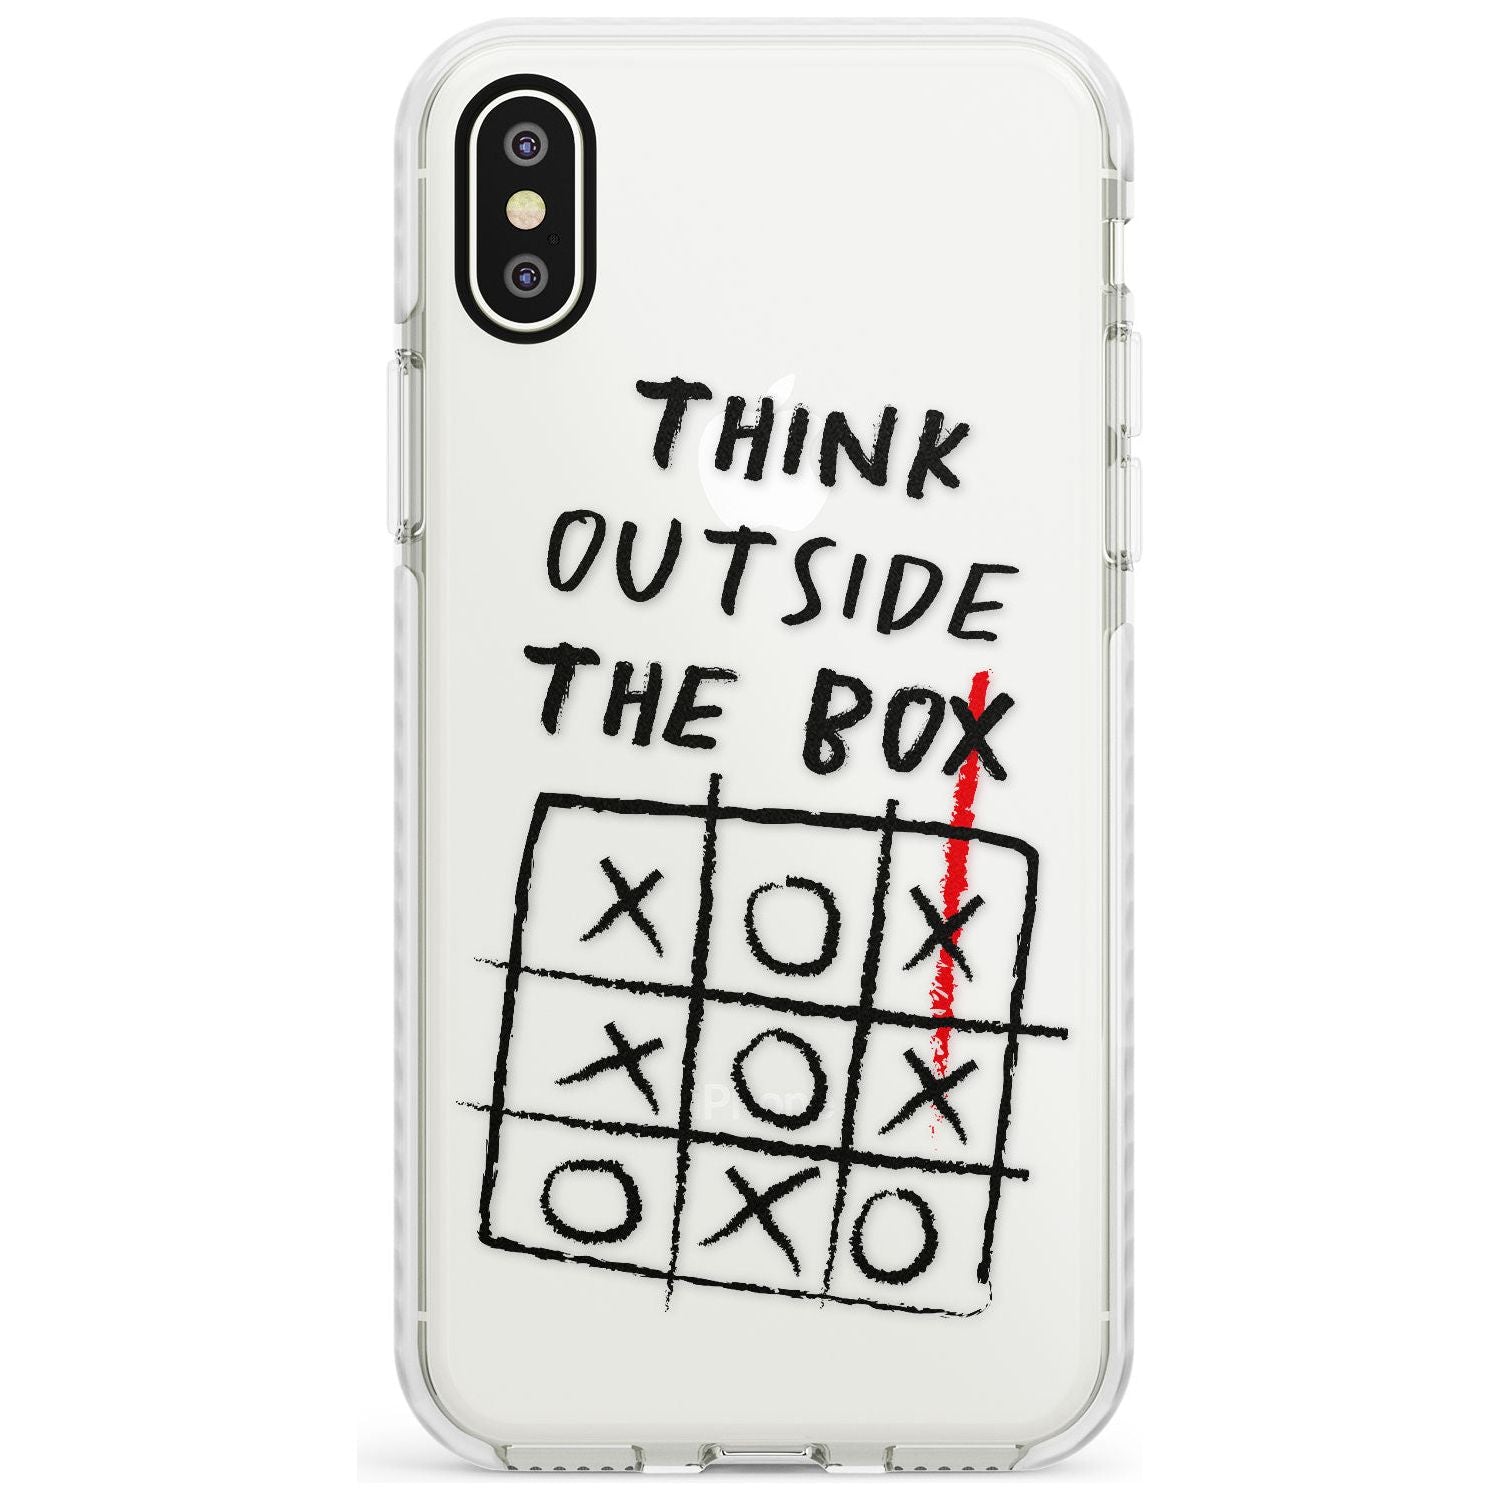 "Think Outside the Box" Impact Phone Case for iPhone X XS Max XR